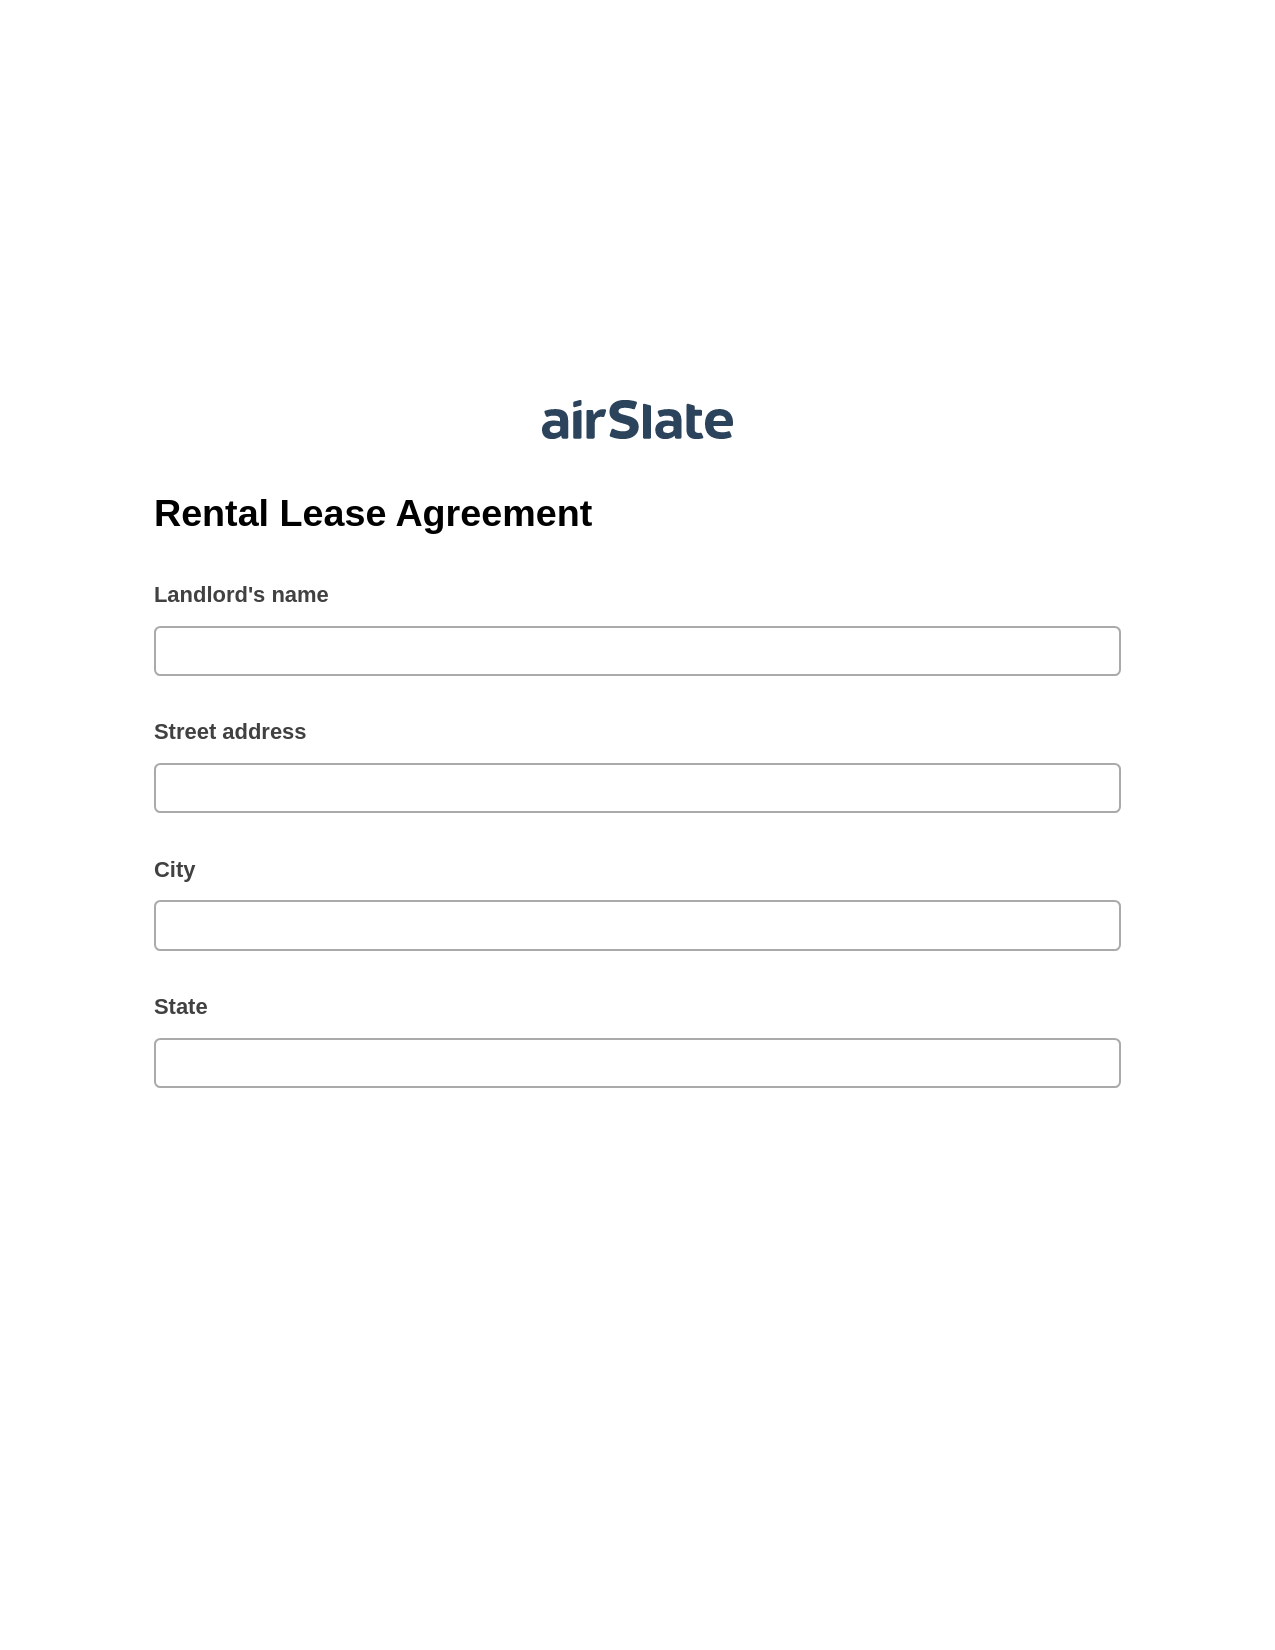 Rental Lease Agreement Pre-fill from Excel Spreadsheet Bot, Invoke Salesforce Process Bot, Export to Google Sheet Bot